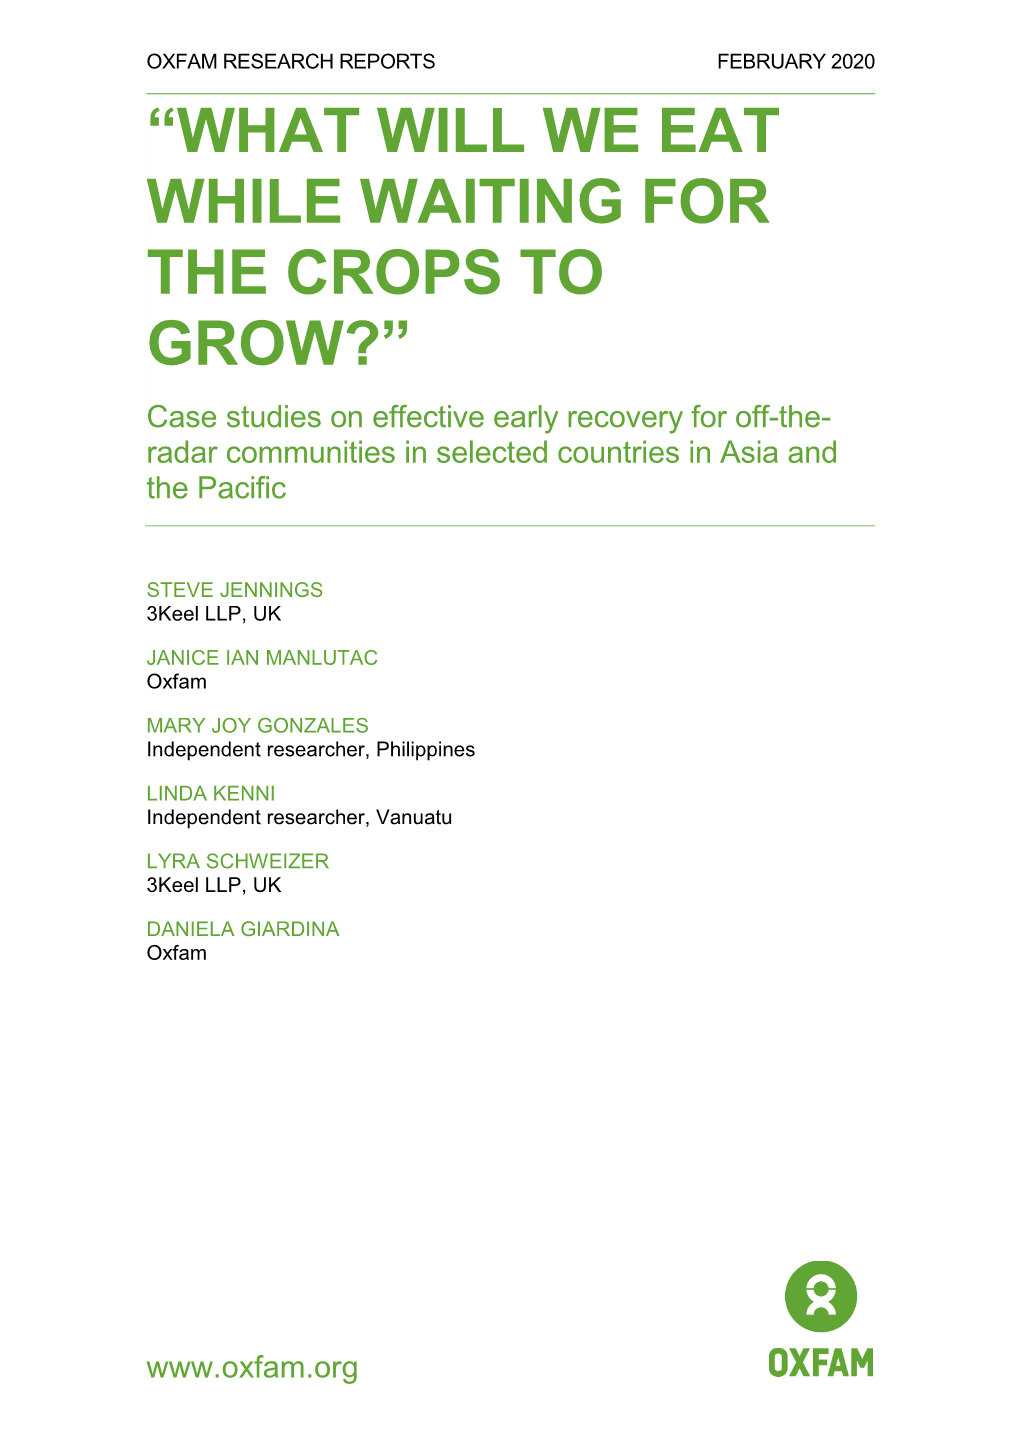 "What Will We Eat While Waiting for the Crops to Grow?" Case Studies on Effective Early Recovery for Off-The-Radar